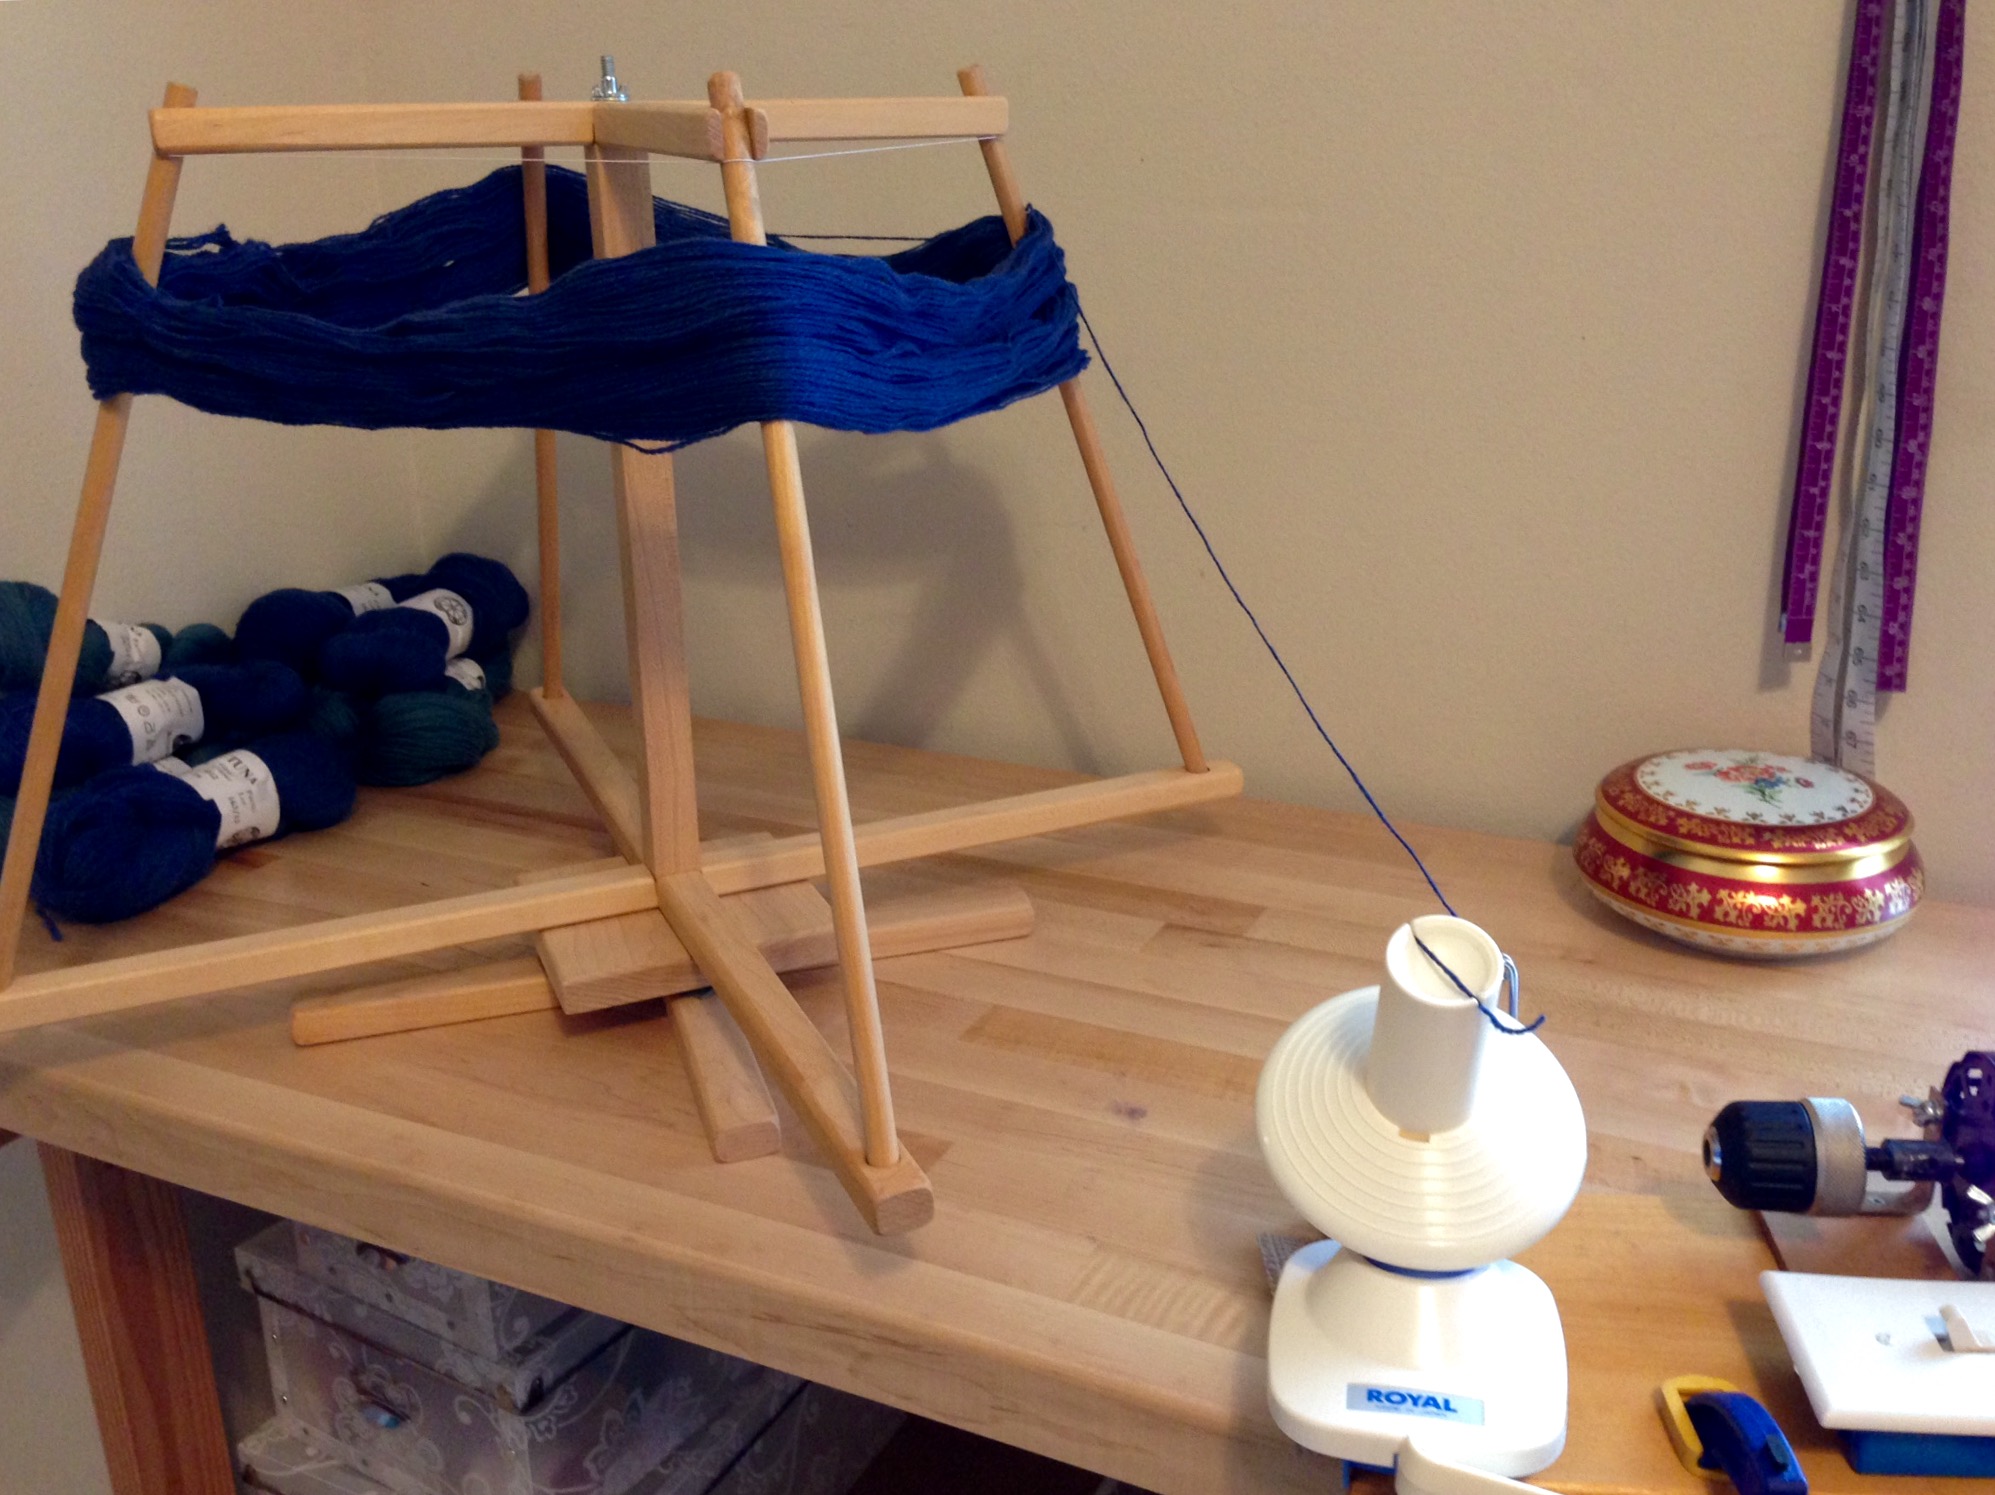 How to wind yarn using a swift and ball winder